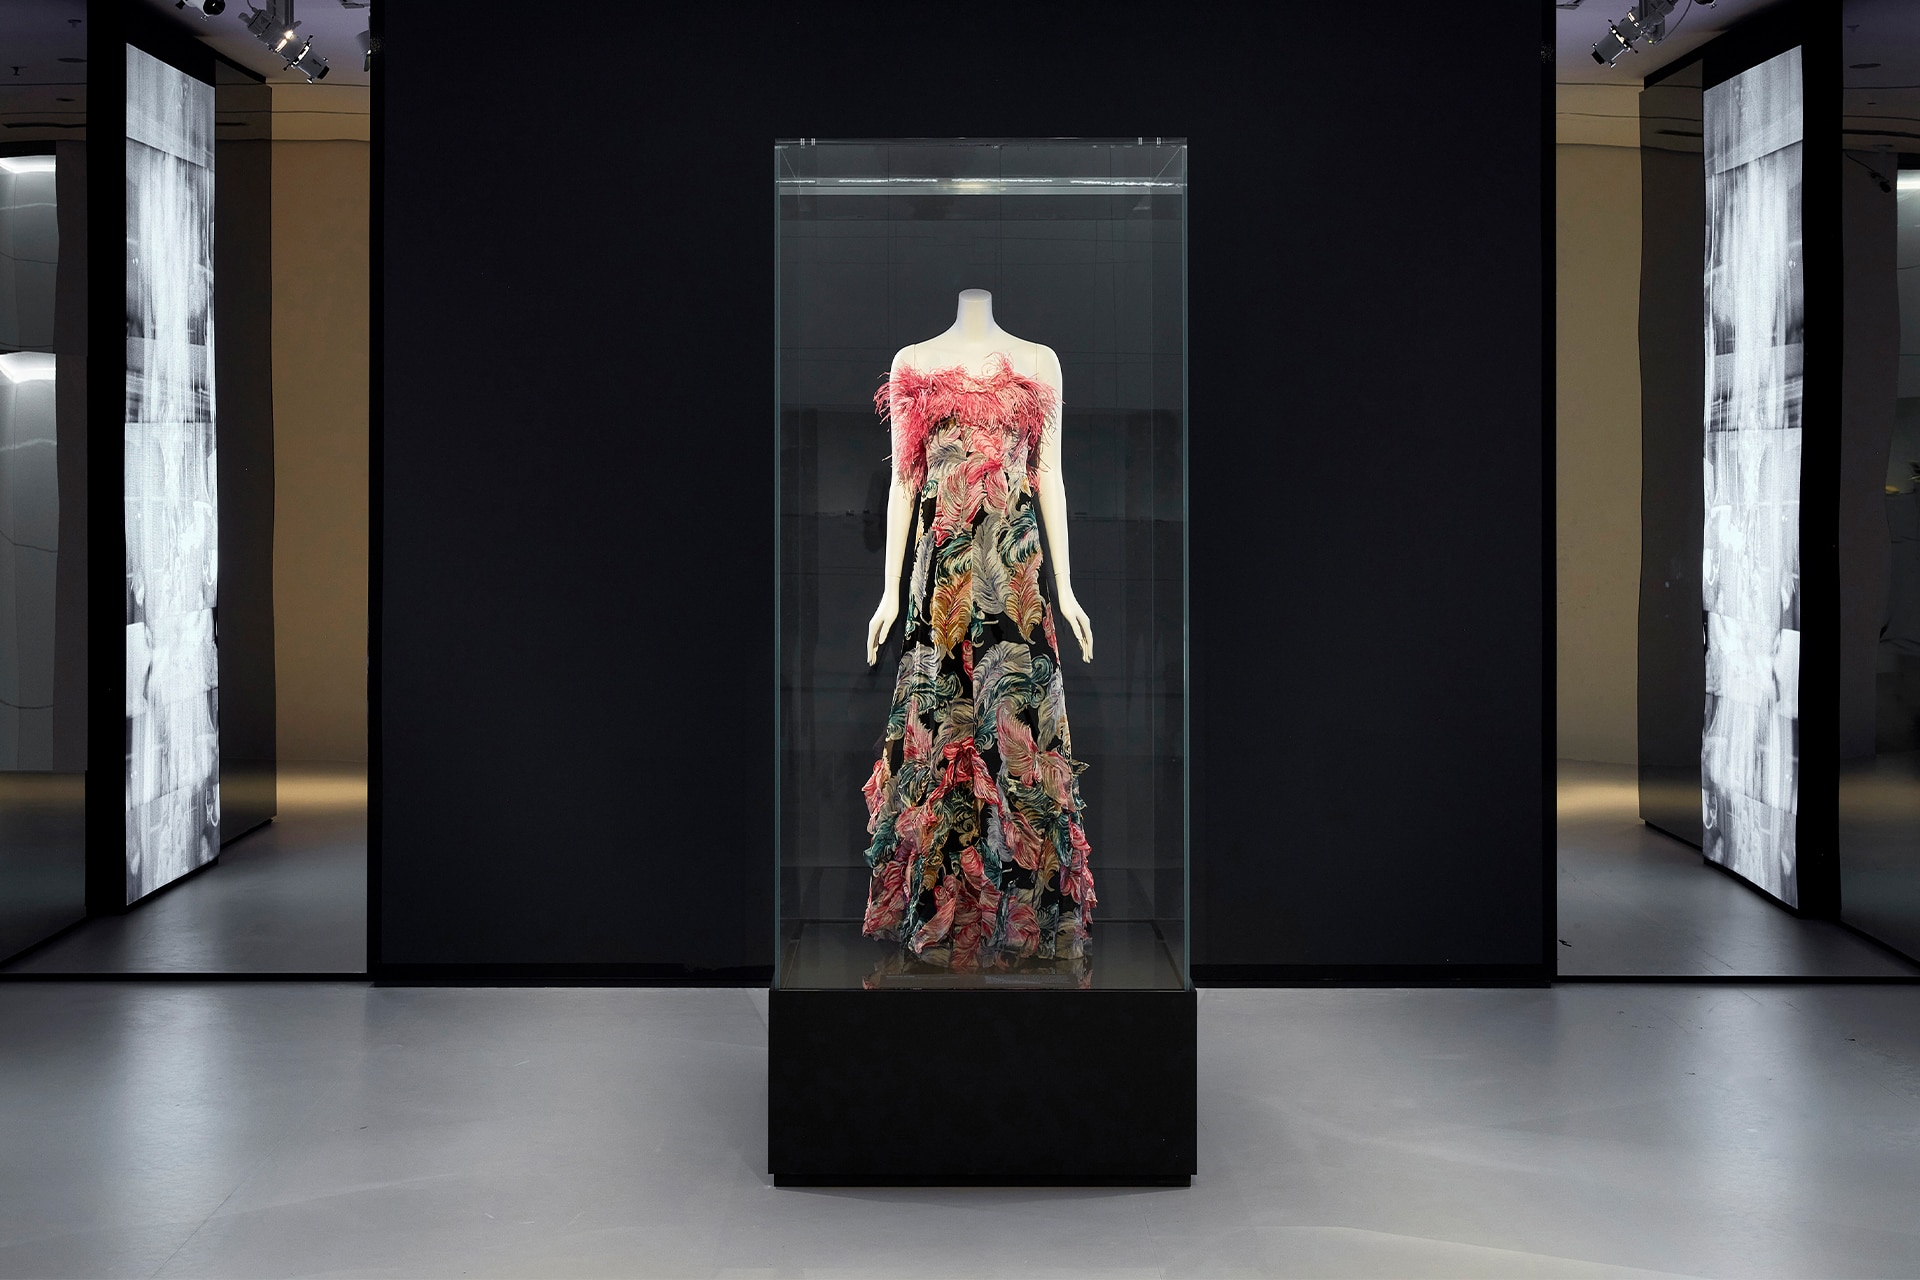 First look: Take a tour of the NGV's landmark Gabrielle Chanel